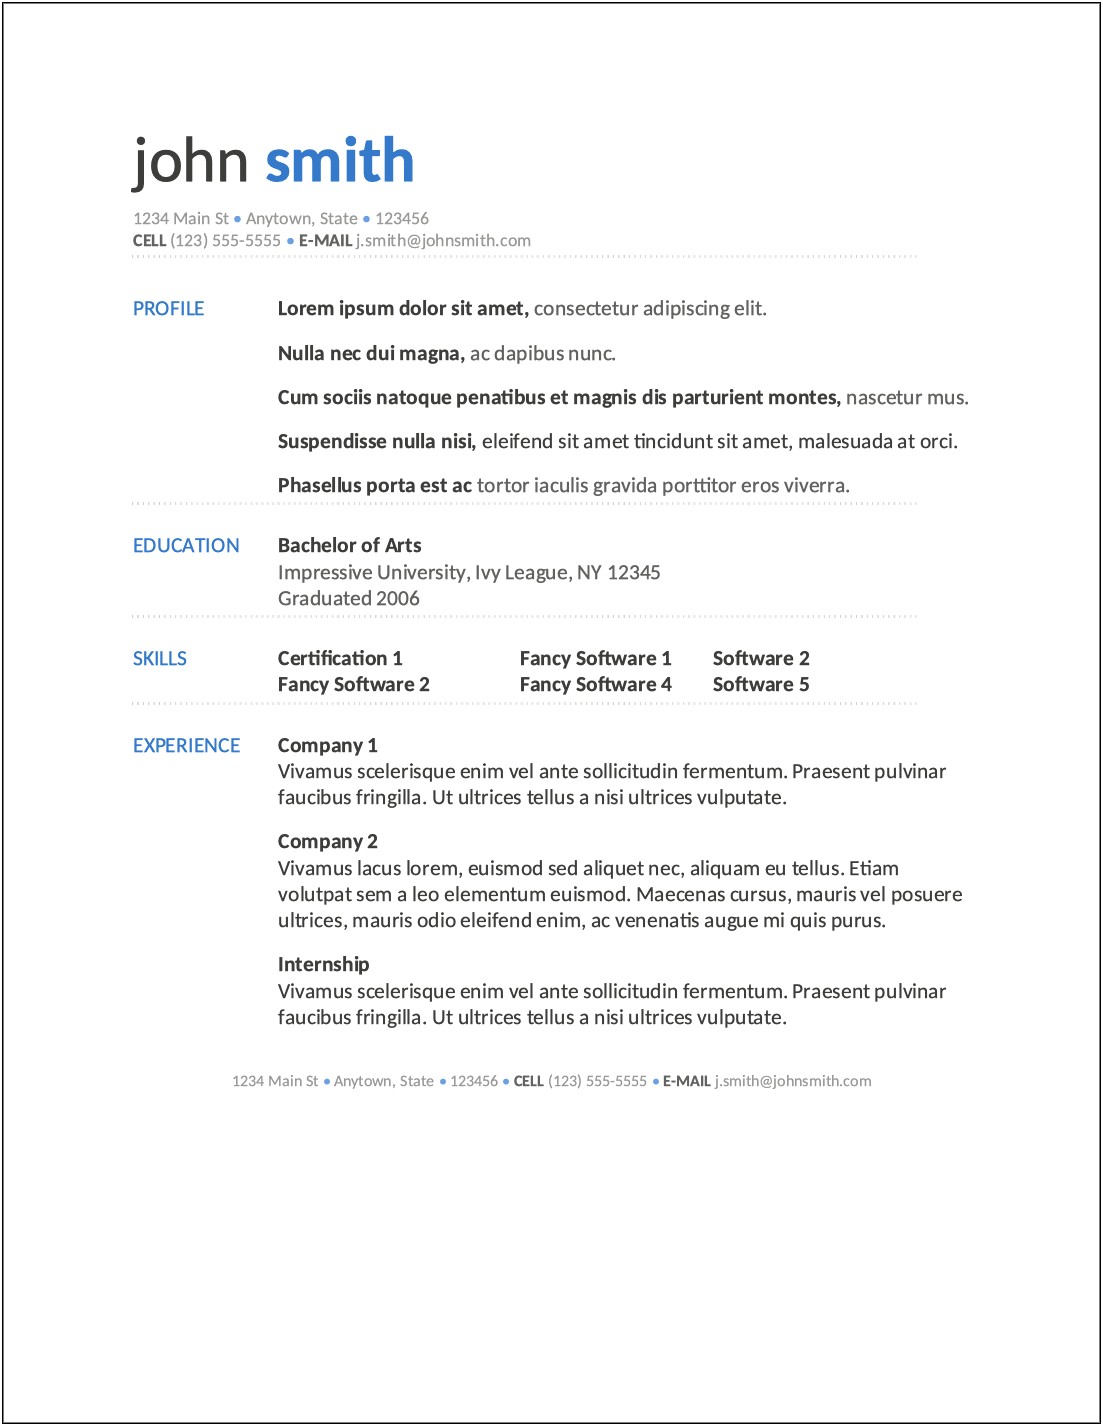 Resume Templates For Apache Open Office